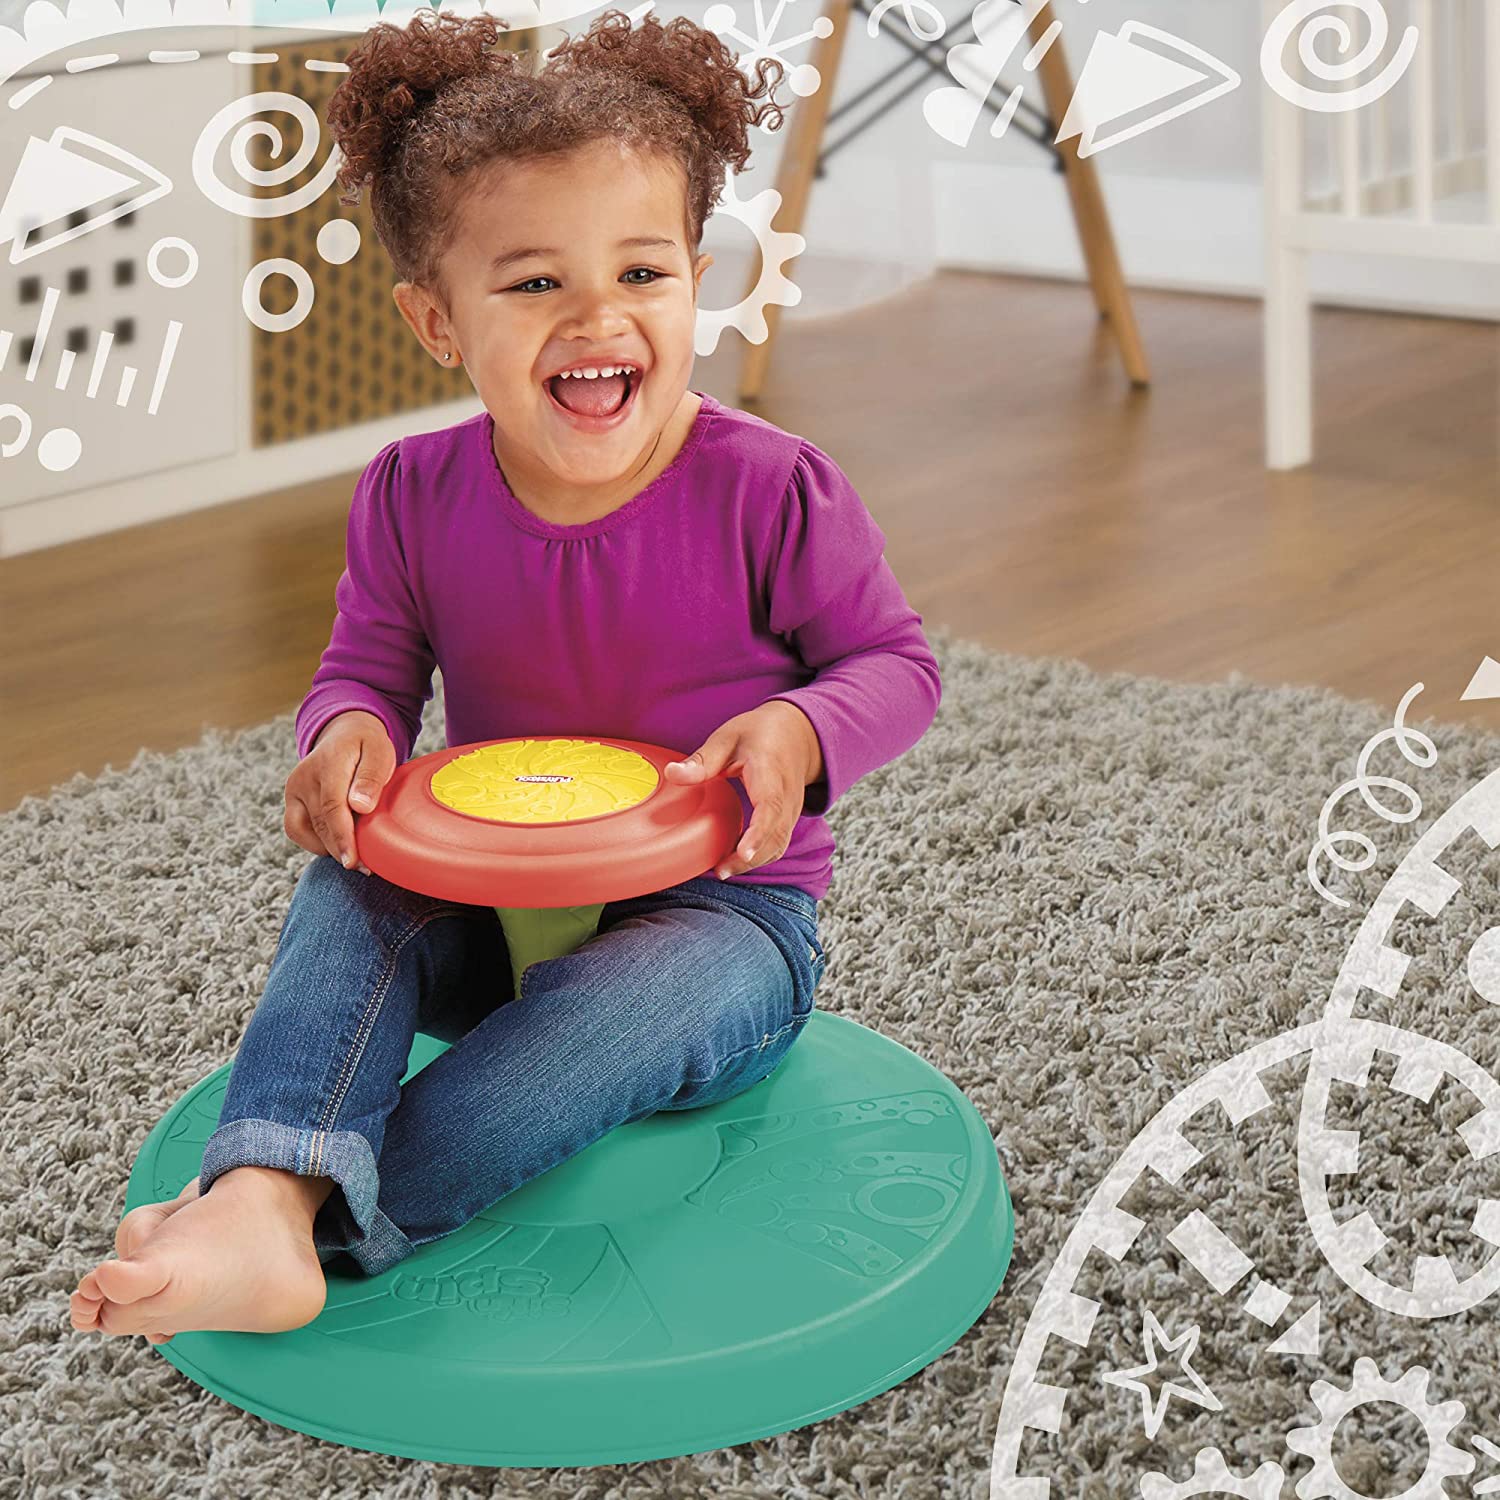 Playskool Sit n Spin Classic Spinning Activity Toy for Toddlers Ages Over 18 Months - image 4 of 5